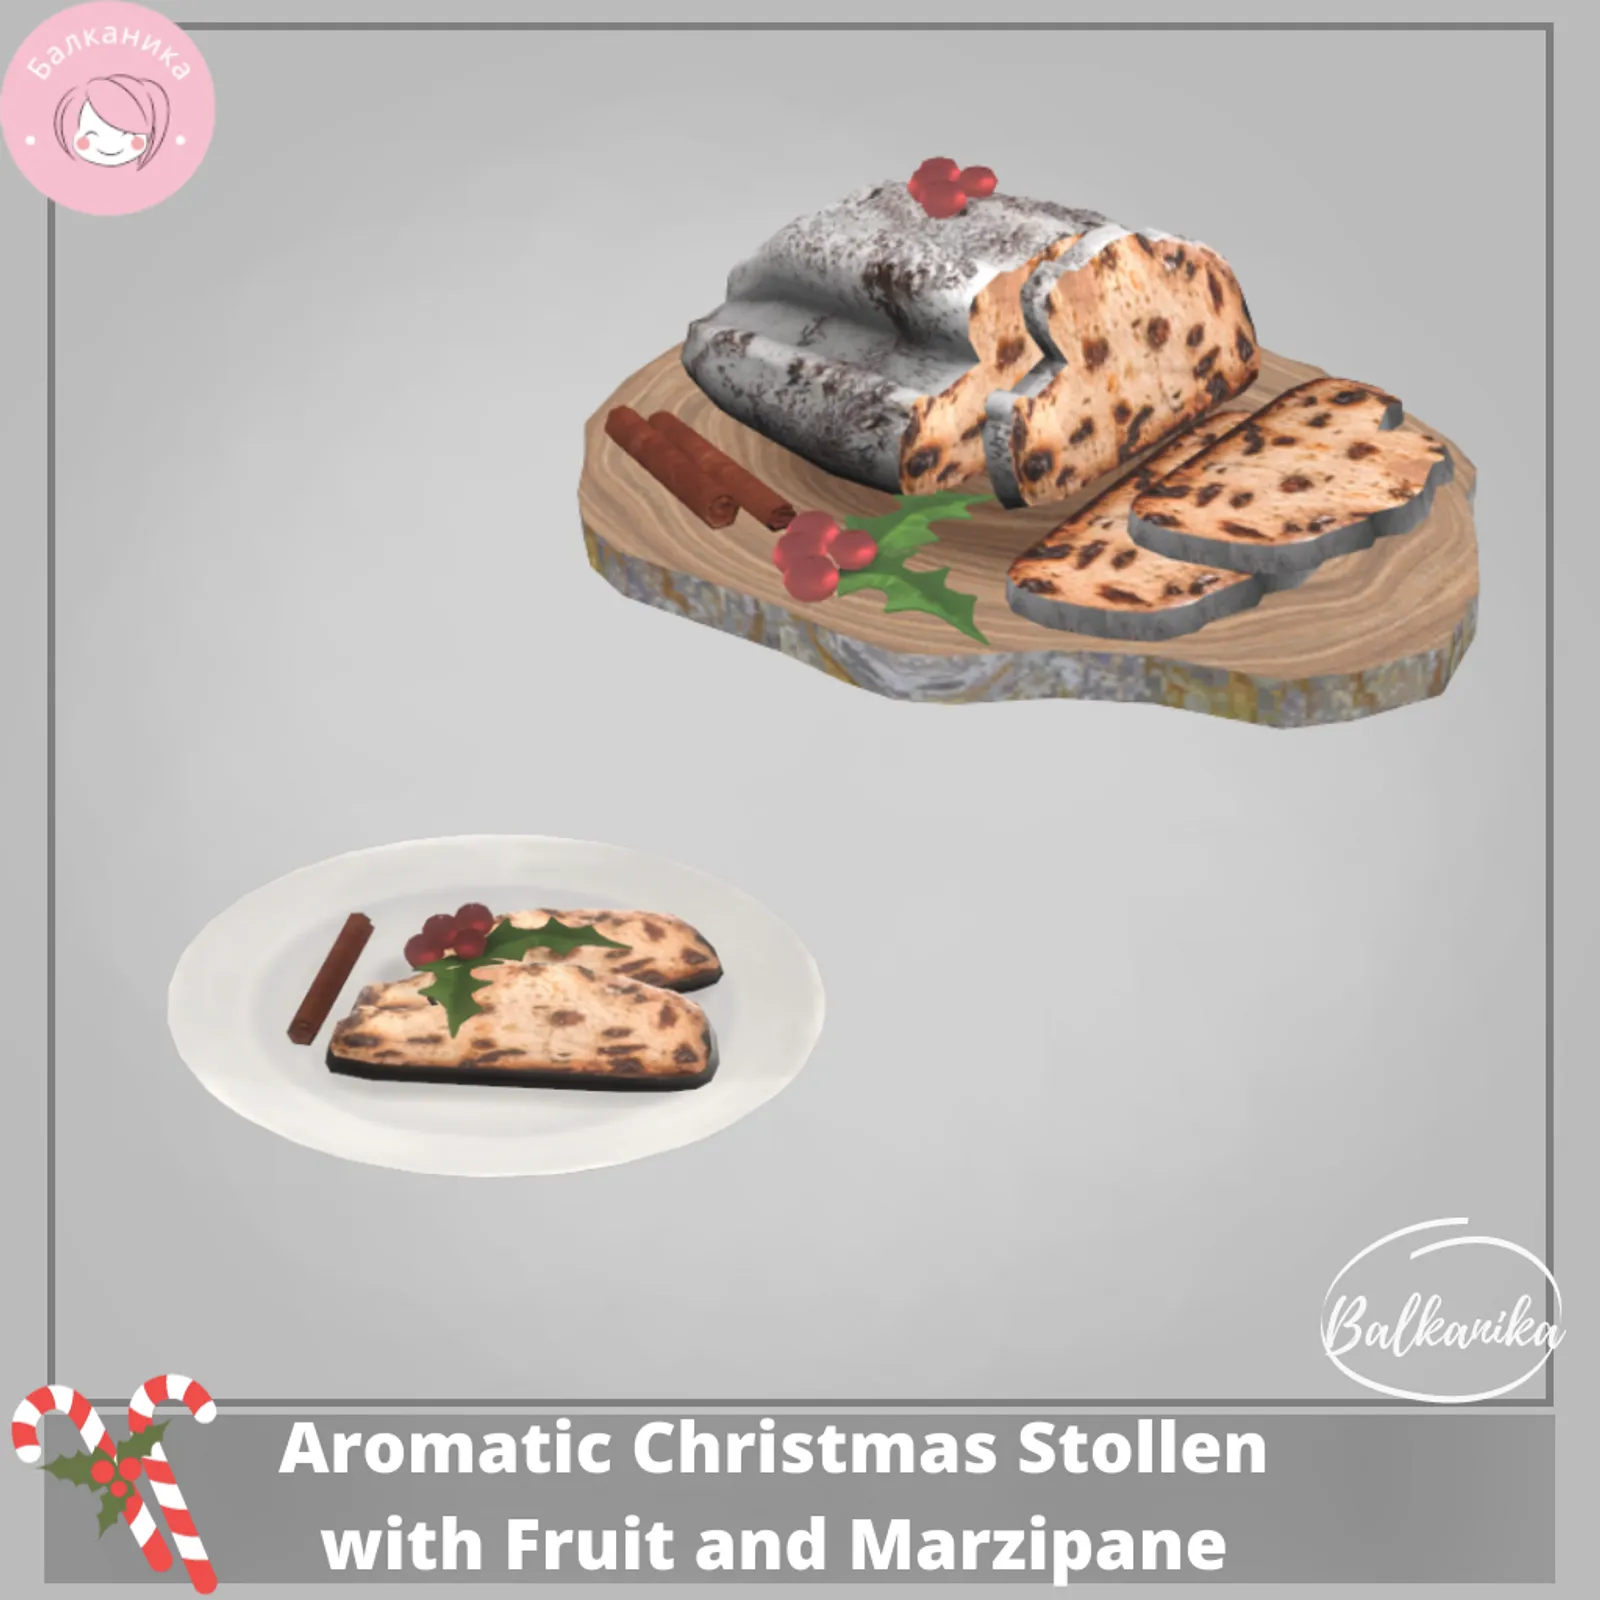 Aromatic Christmas Stollen with Fruit and Marzipan